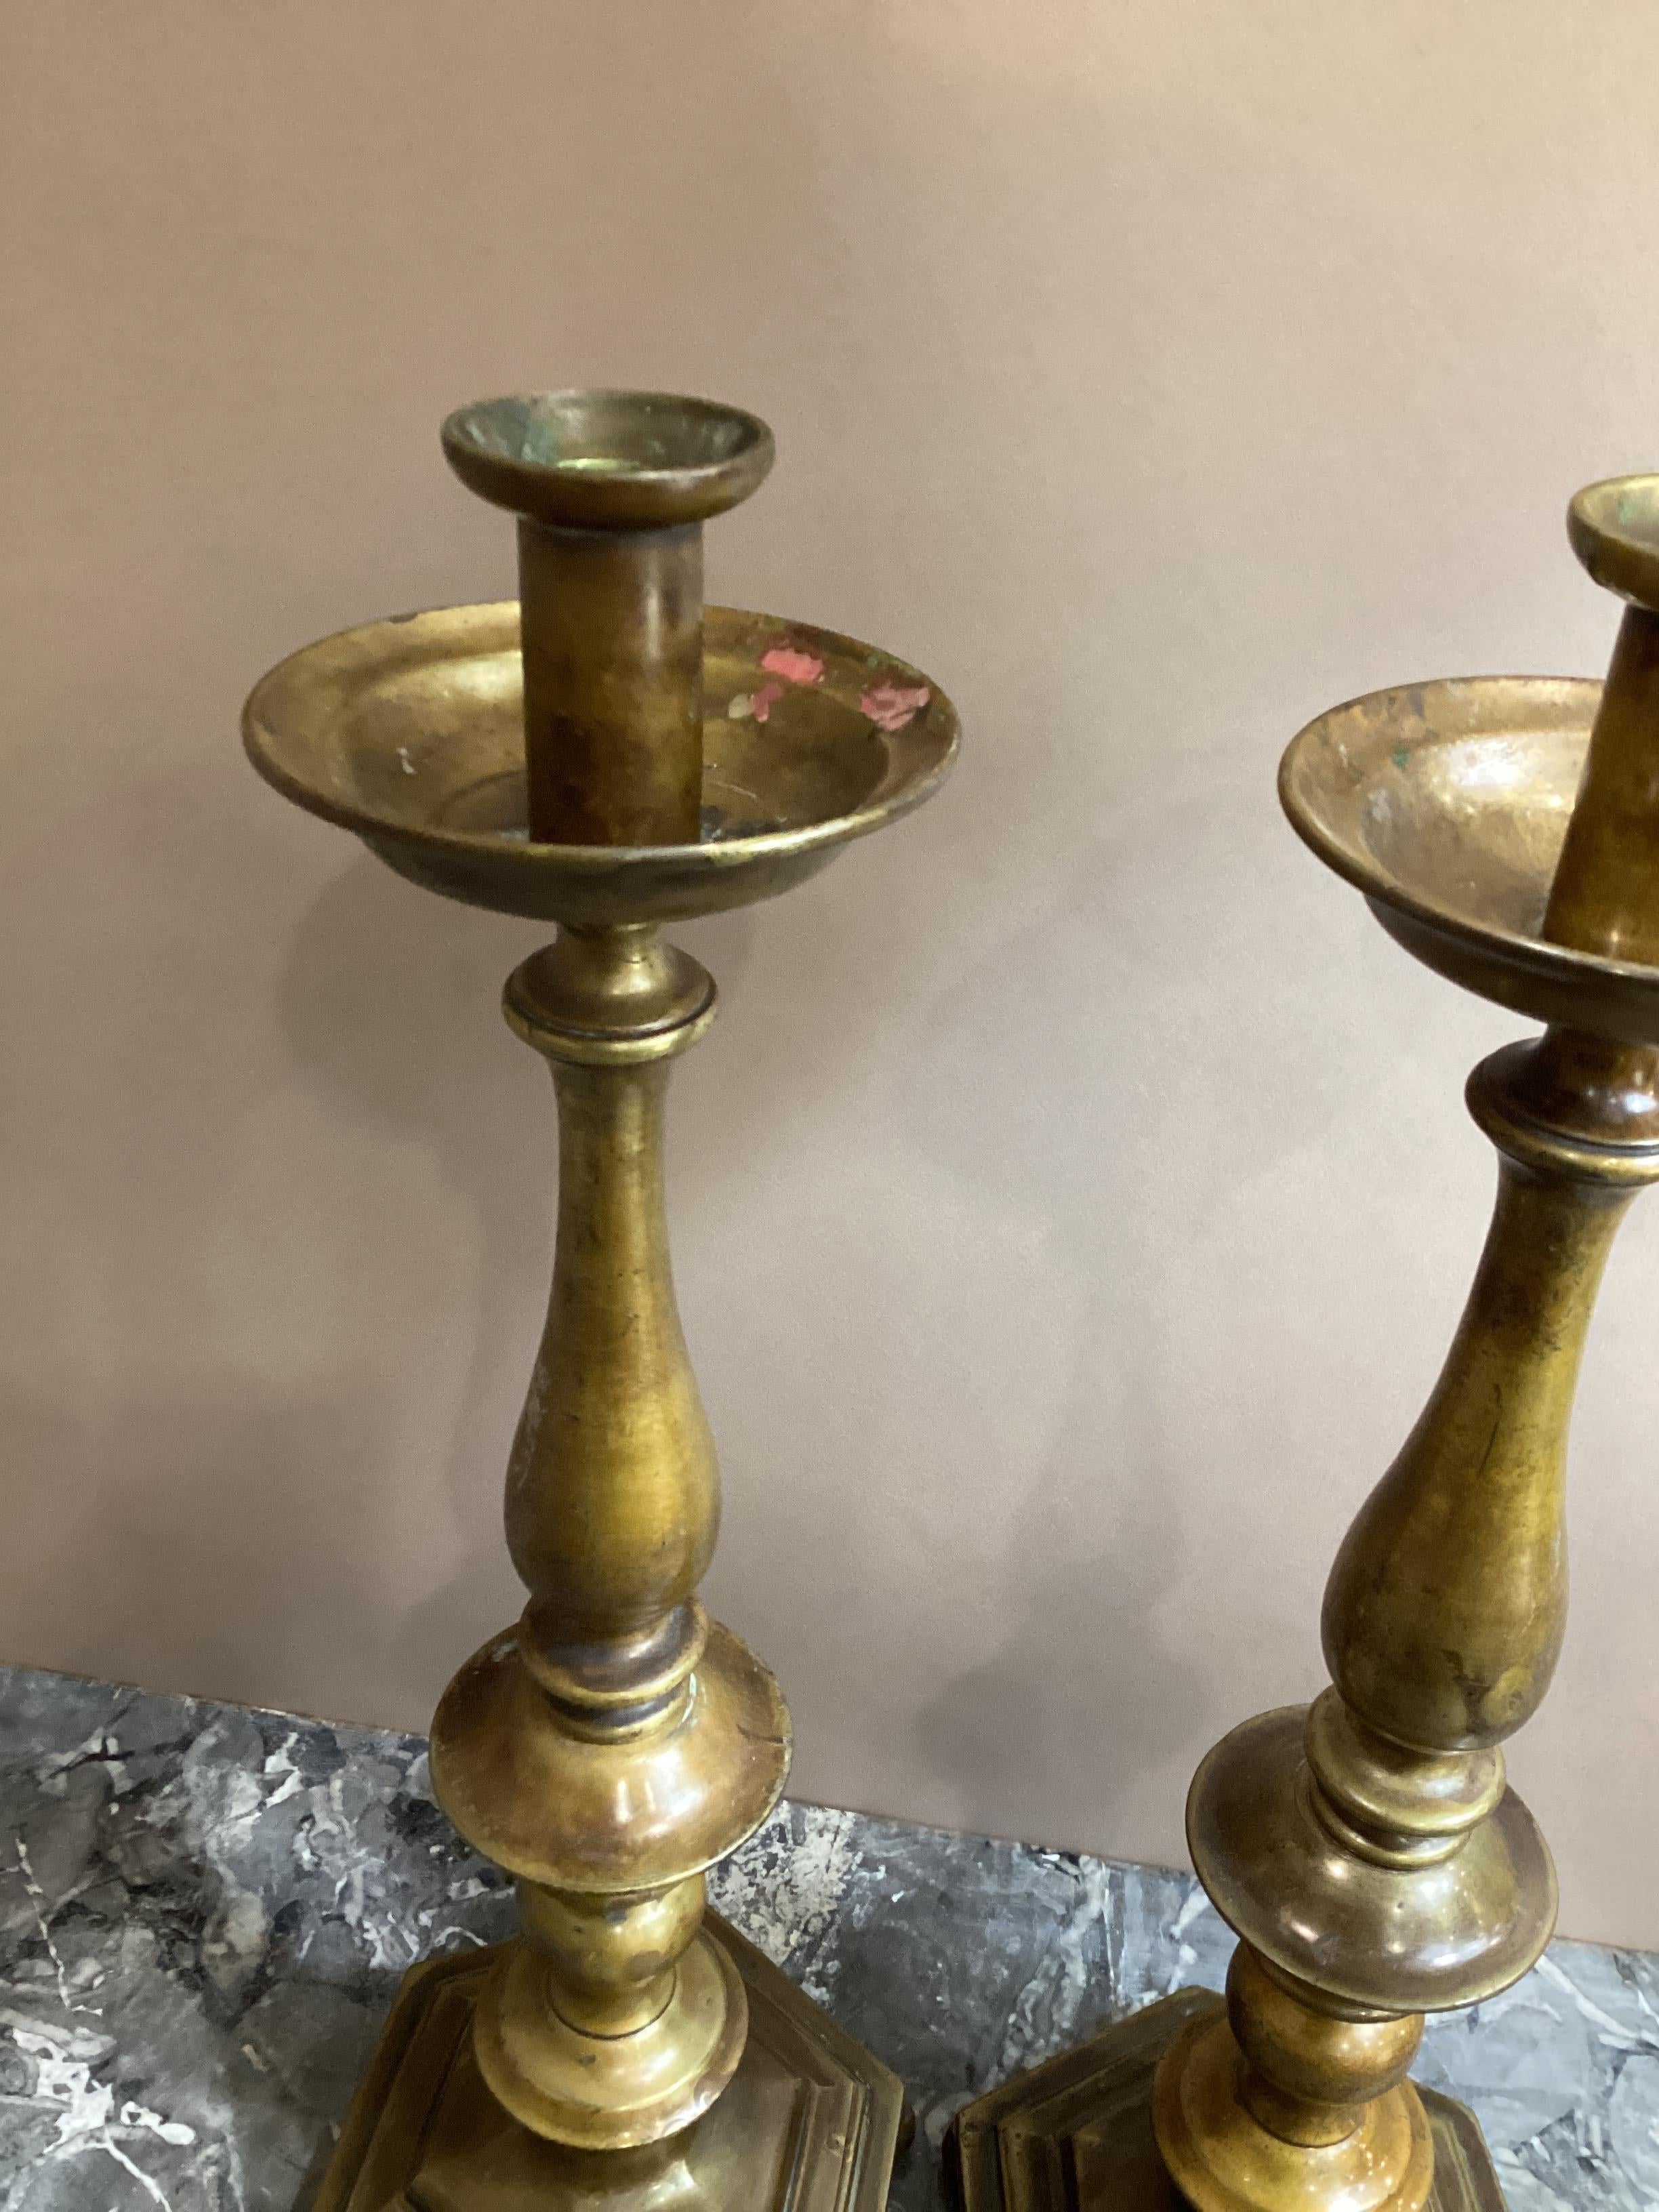 Pair of English Hexagonal Base Brass Candlesticks. Stamped on base “Made in England “ These can be polished to a high shine which we can provide free of charge.